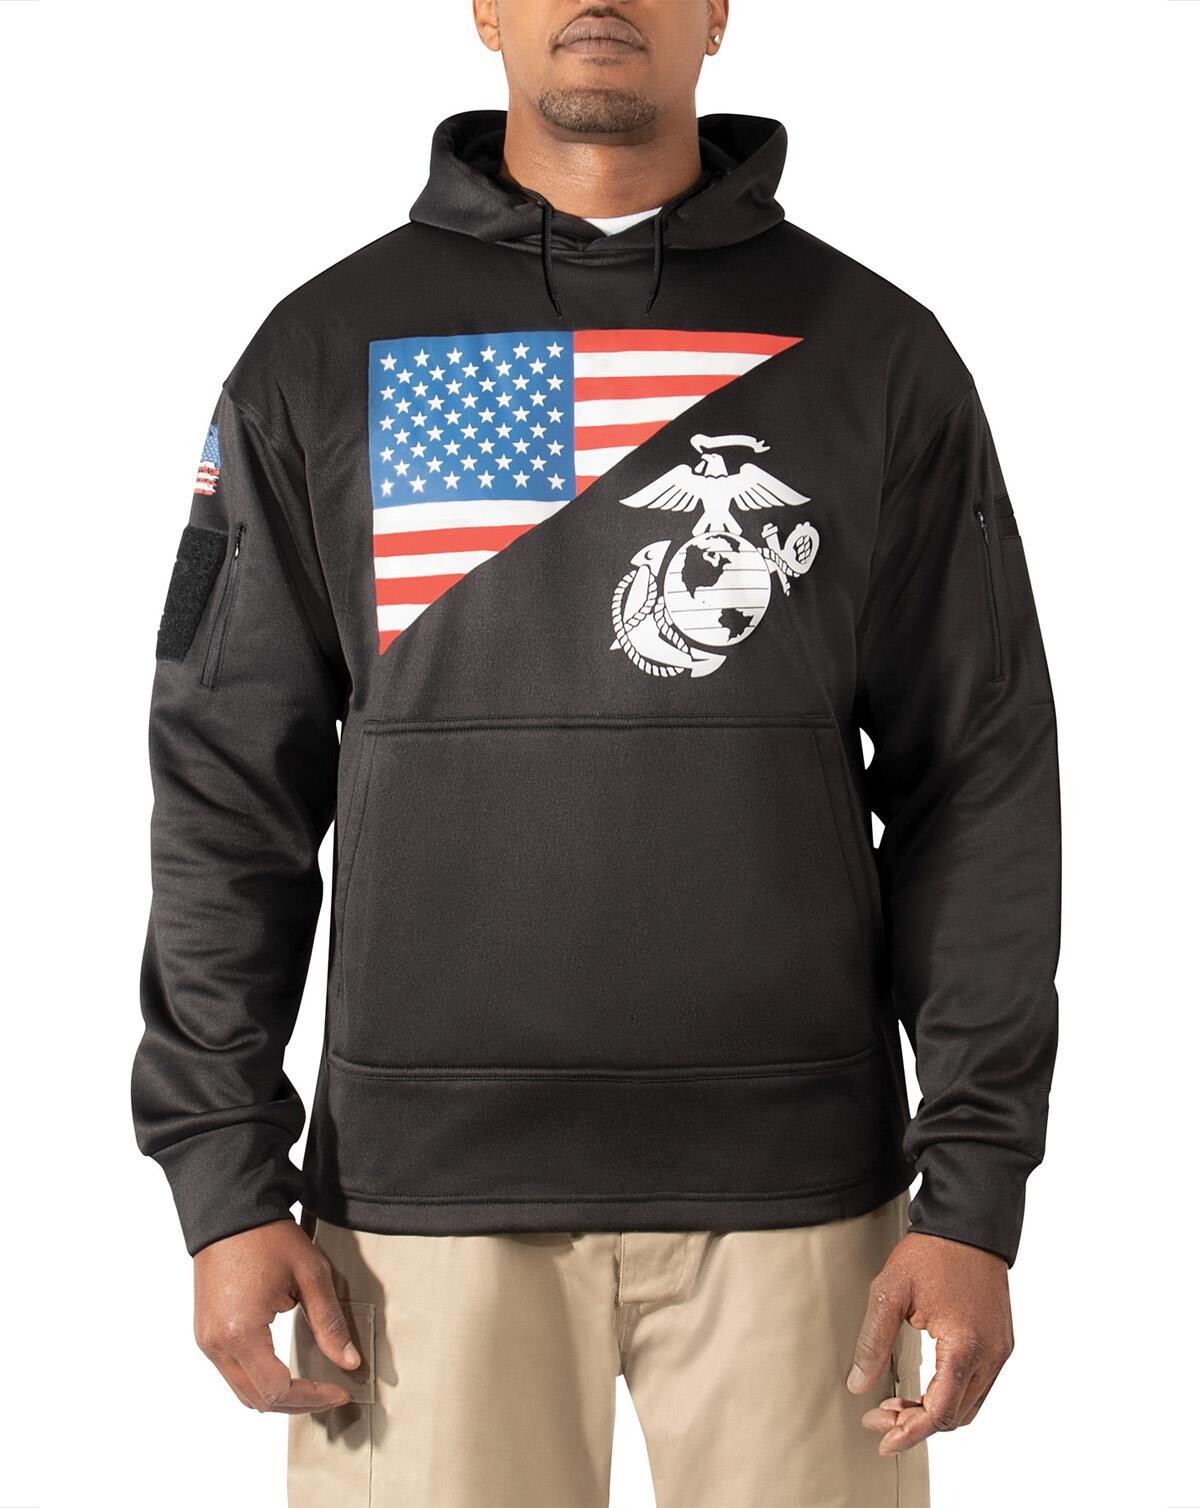 14: Rothco US Flag Concealed Carry Hoodie (Sort, M)